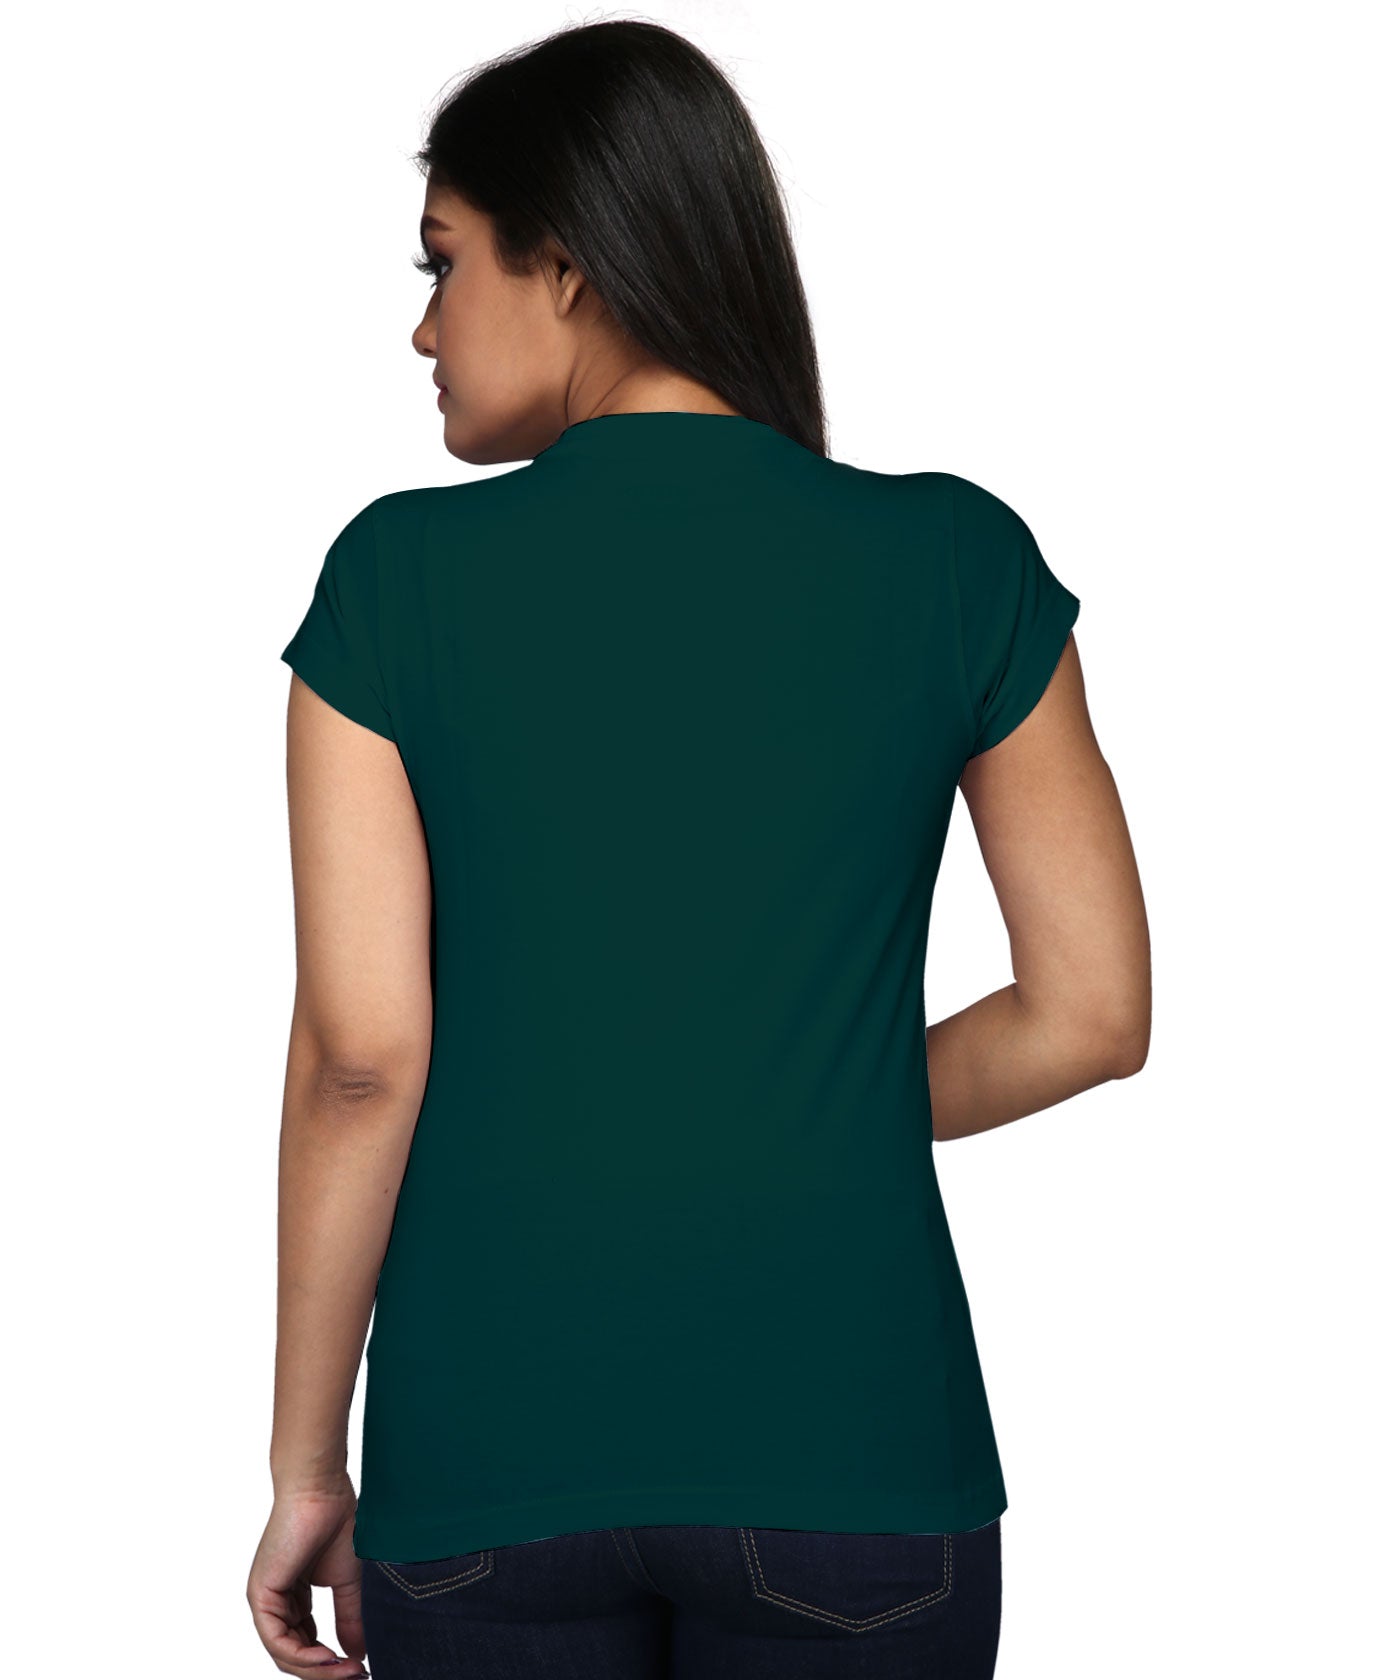 Doubt Your Worth - Block Print Tees for Women - Cactus Green